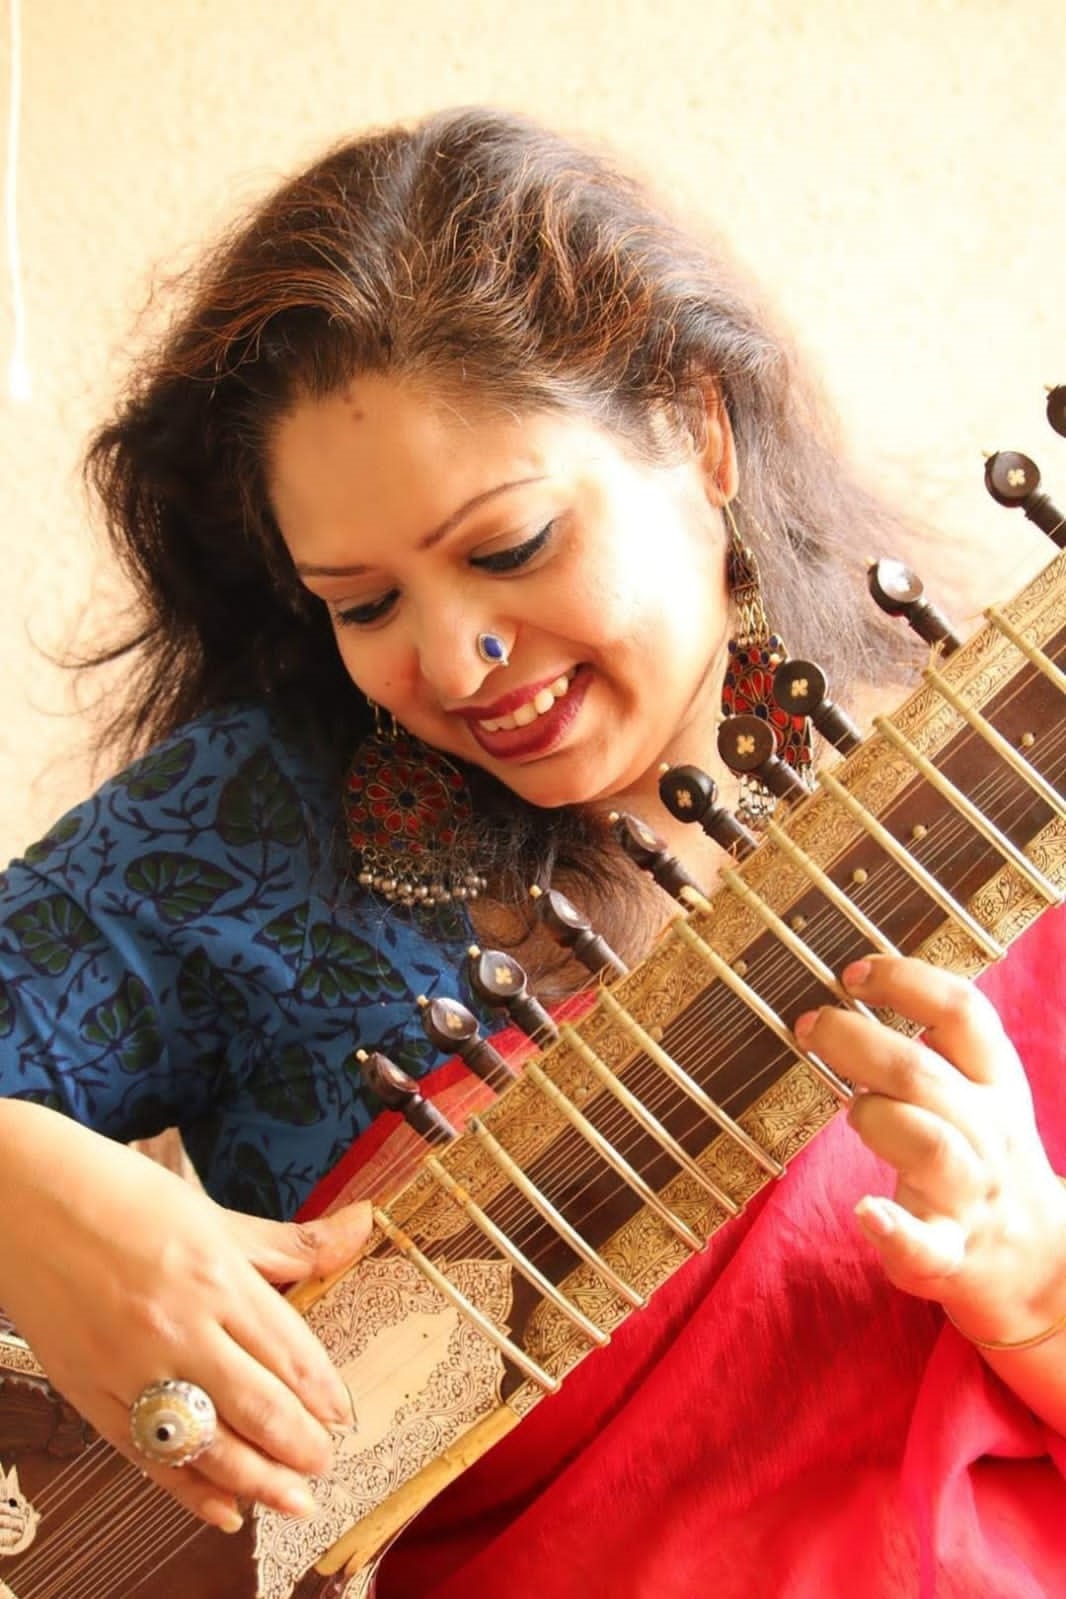 Music is the Language of the Soul, expressed through practice, emotions, and artistry: Sahana Banerjee